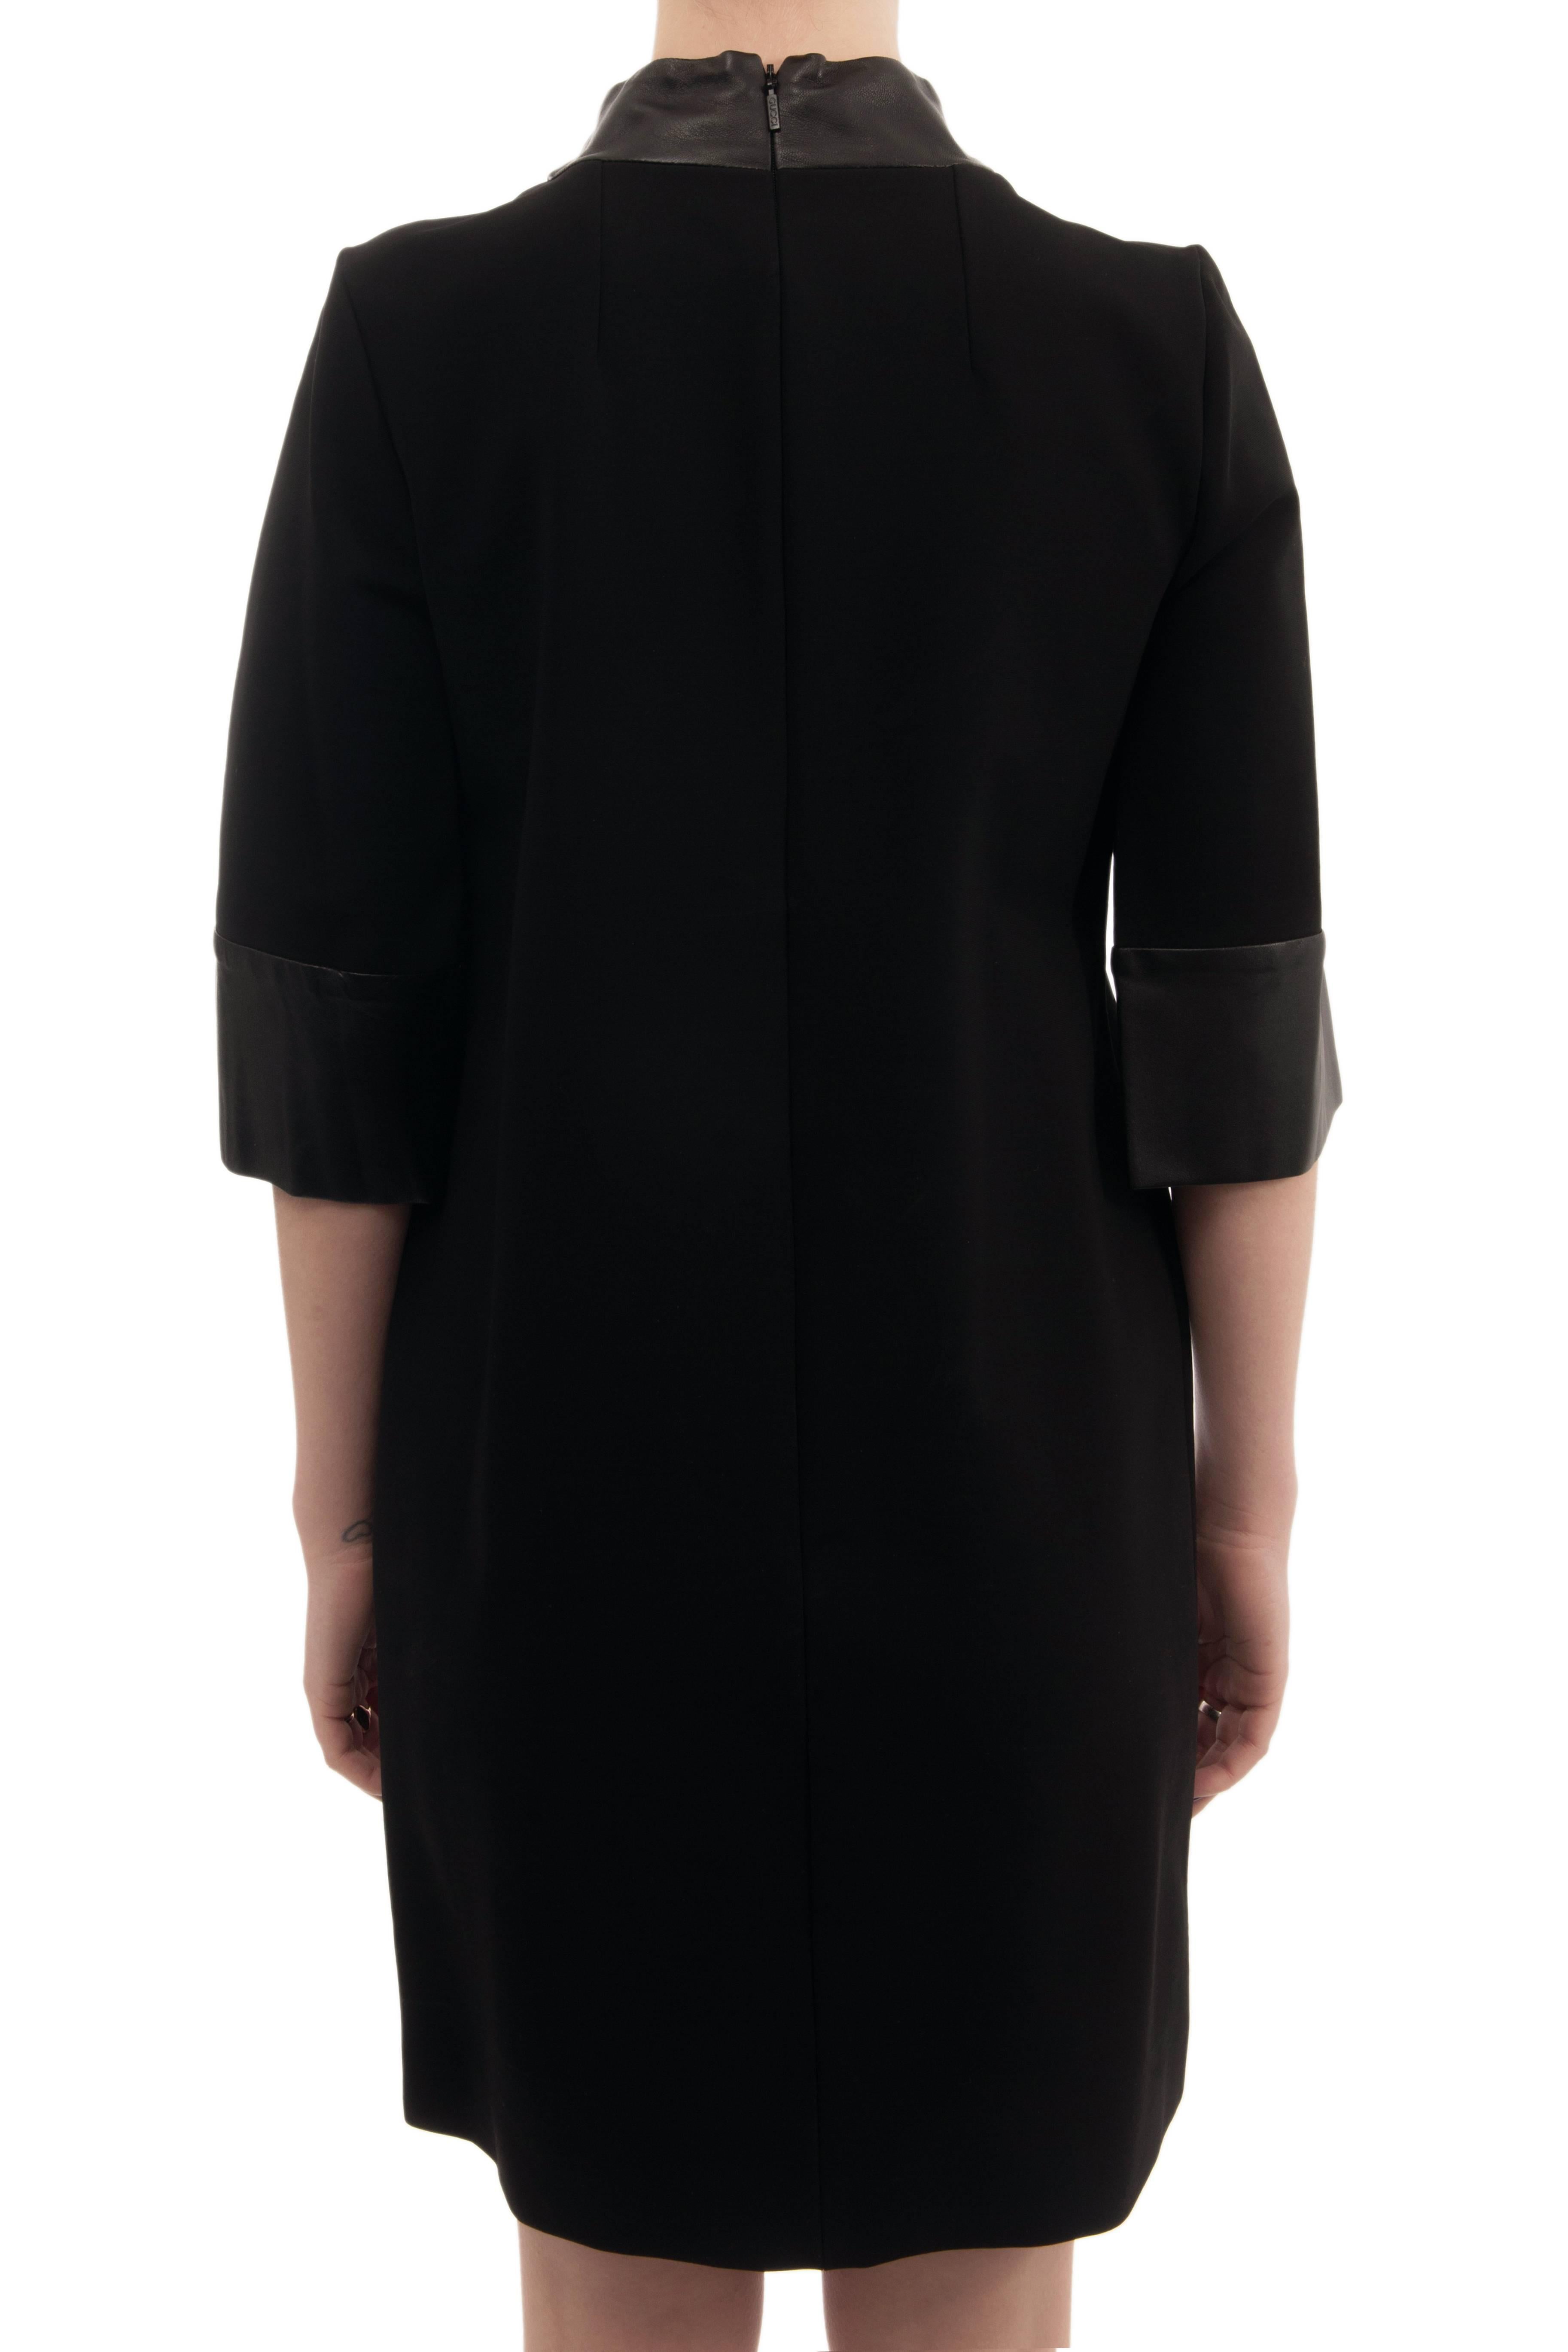 Gucci Black Stretch Crepe Dress with Leather Cuffs and Collar  For Sale 4